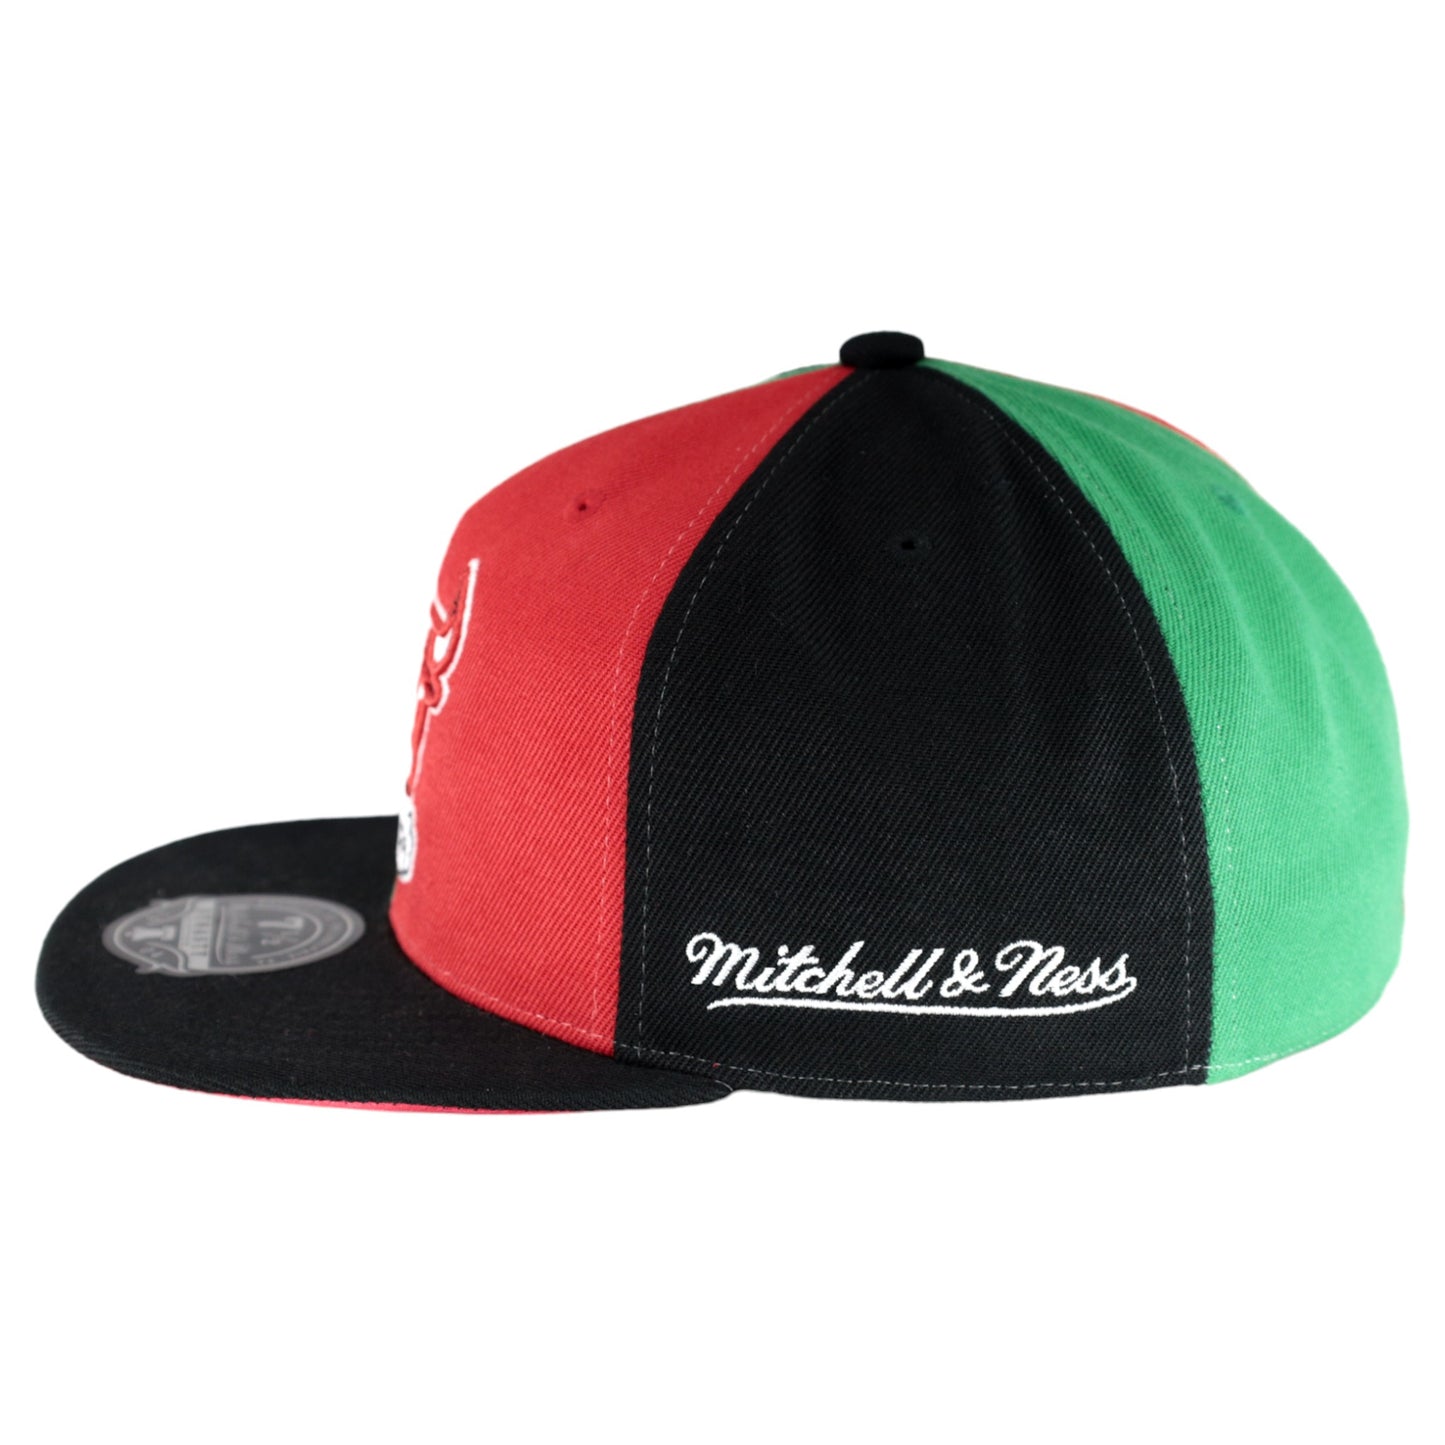 Chicago Bulls Black/Green/Red Tri-Color Mitchell & Ness Fitted Hat